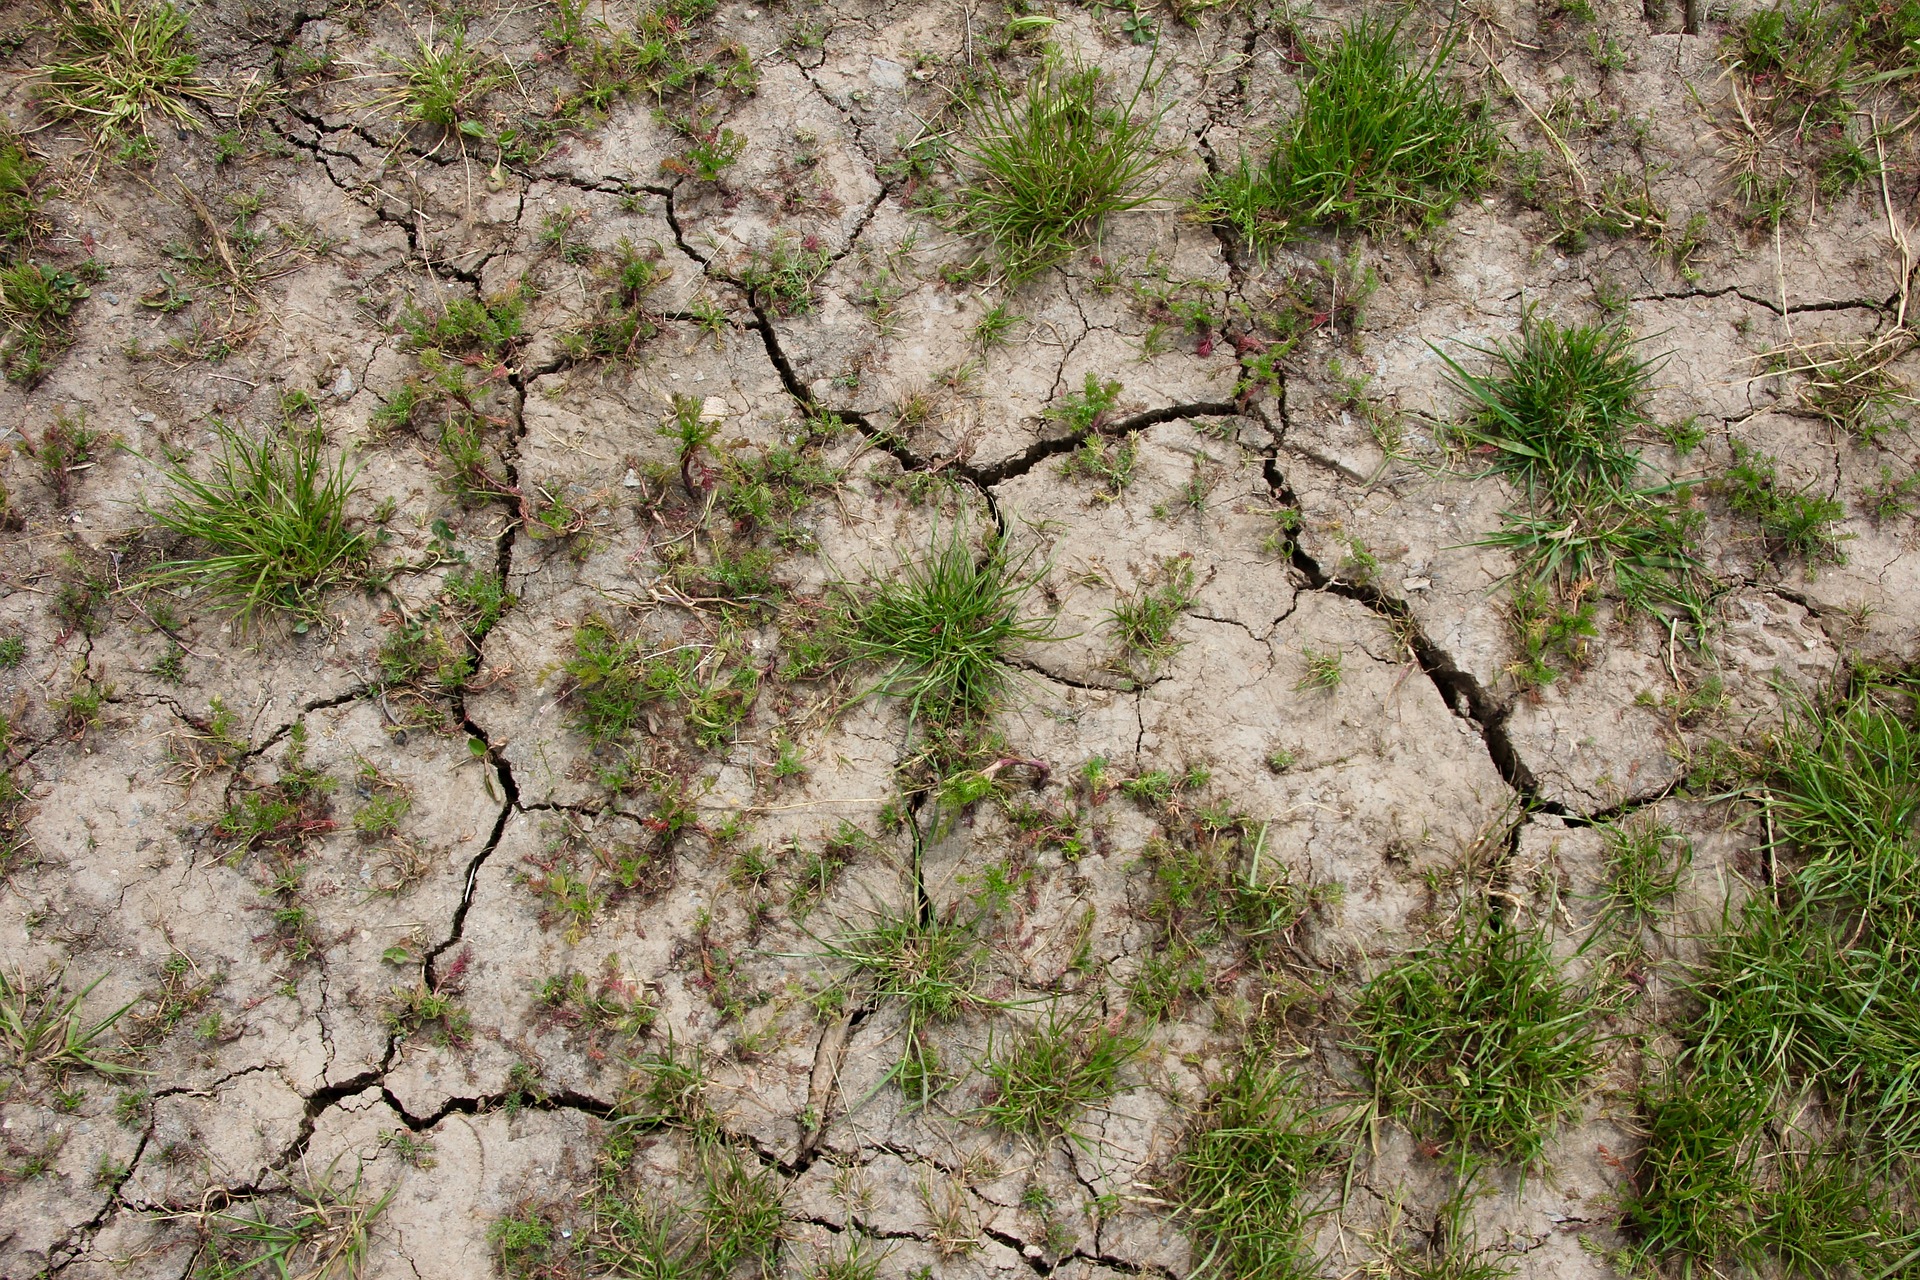 Treating Your Lawn During a Drought